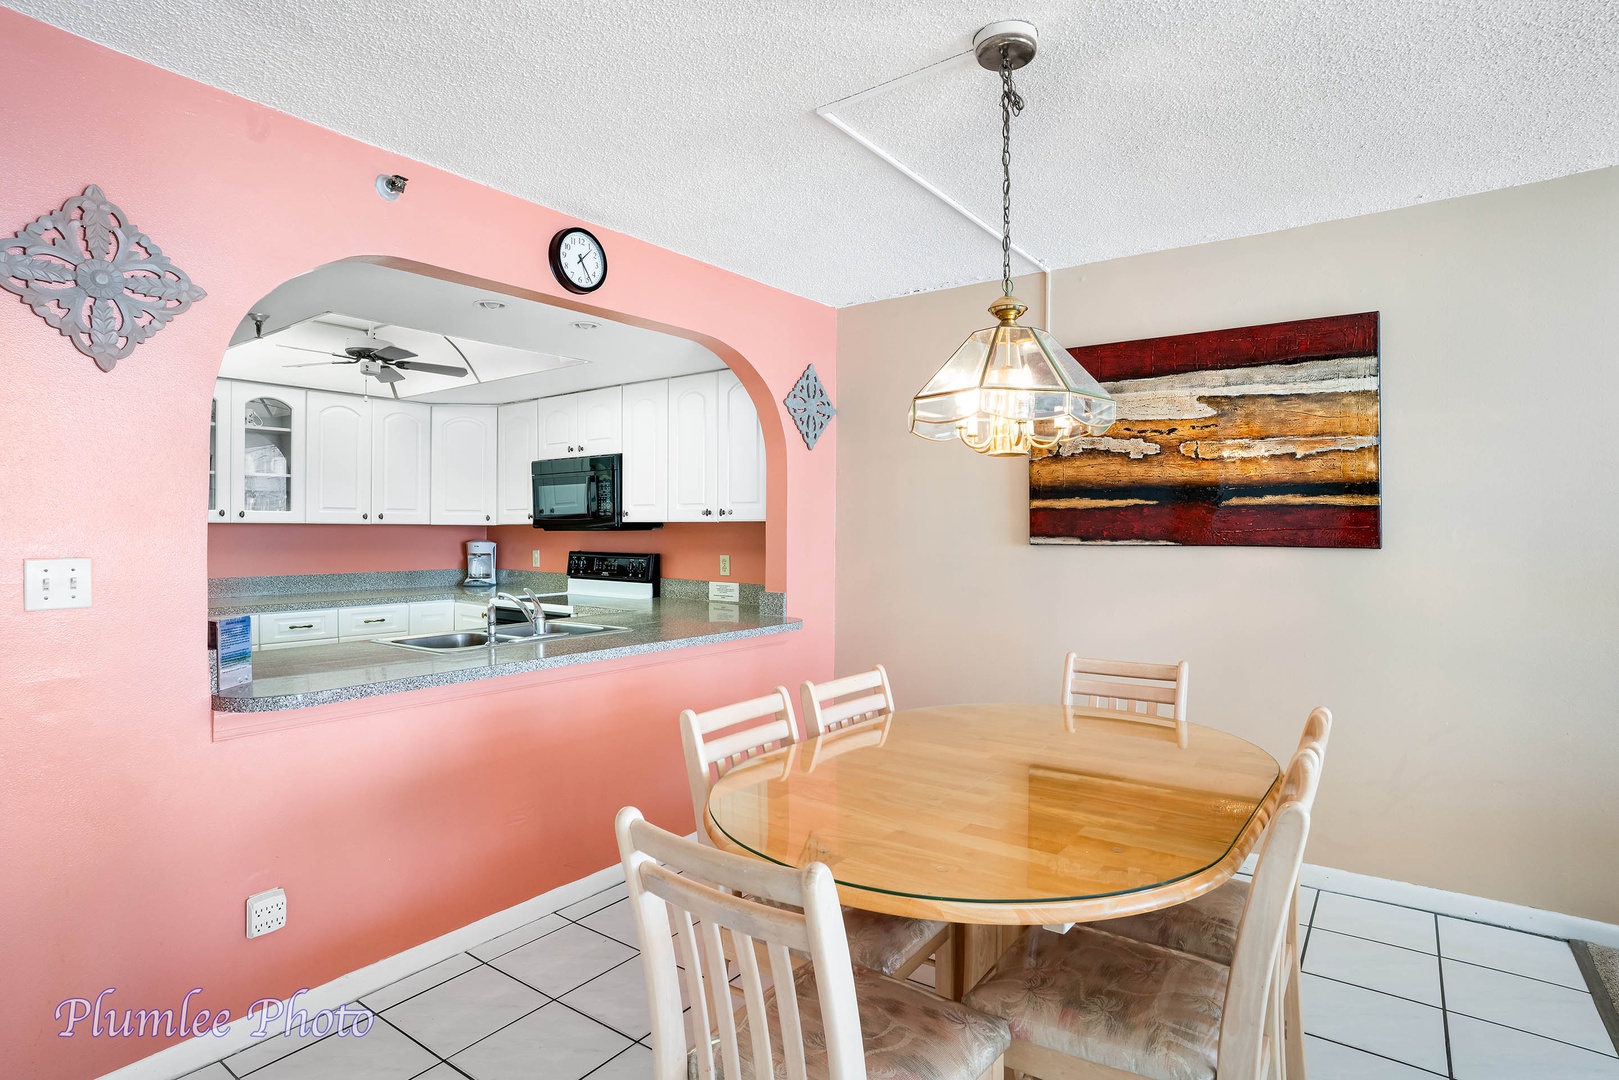 Convenient pass through from kitchen to dining area